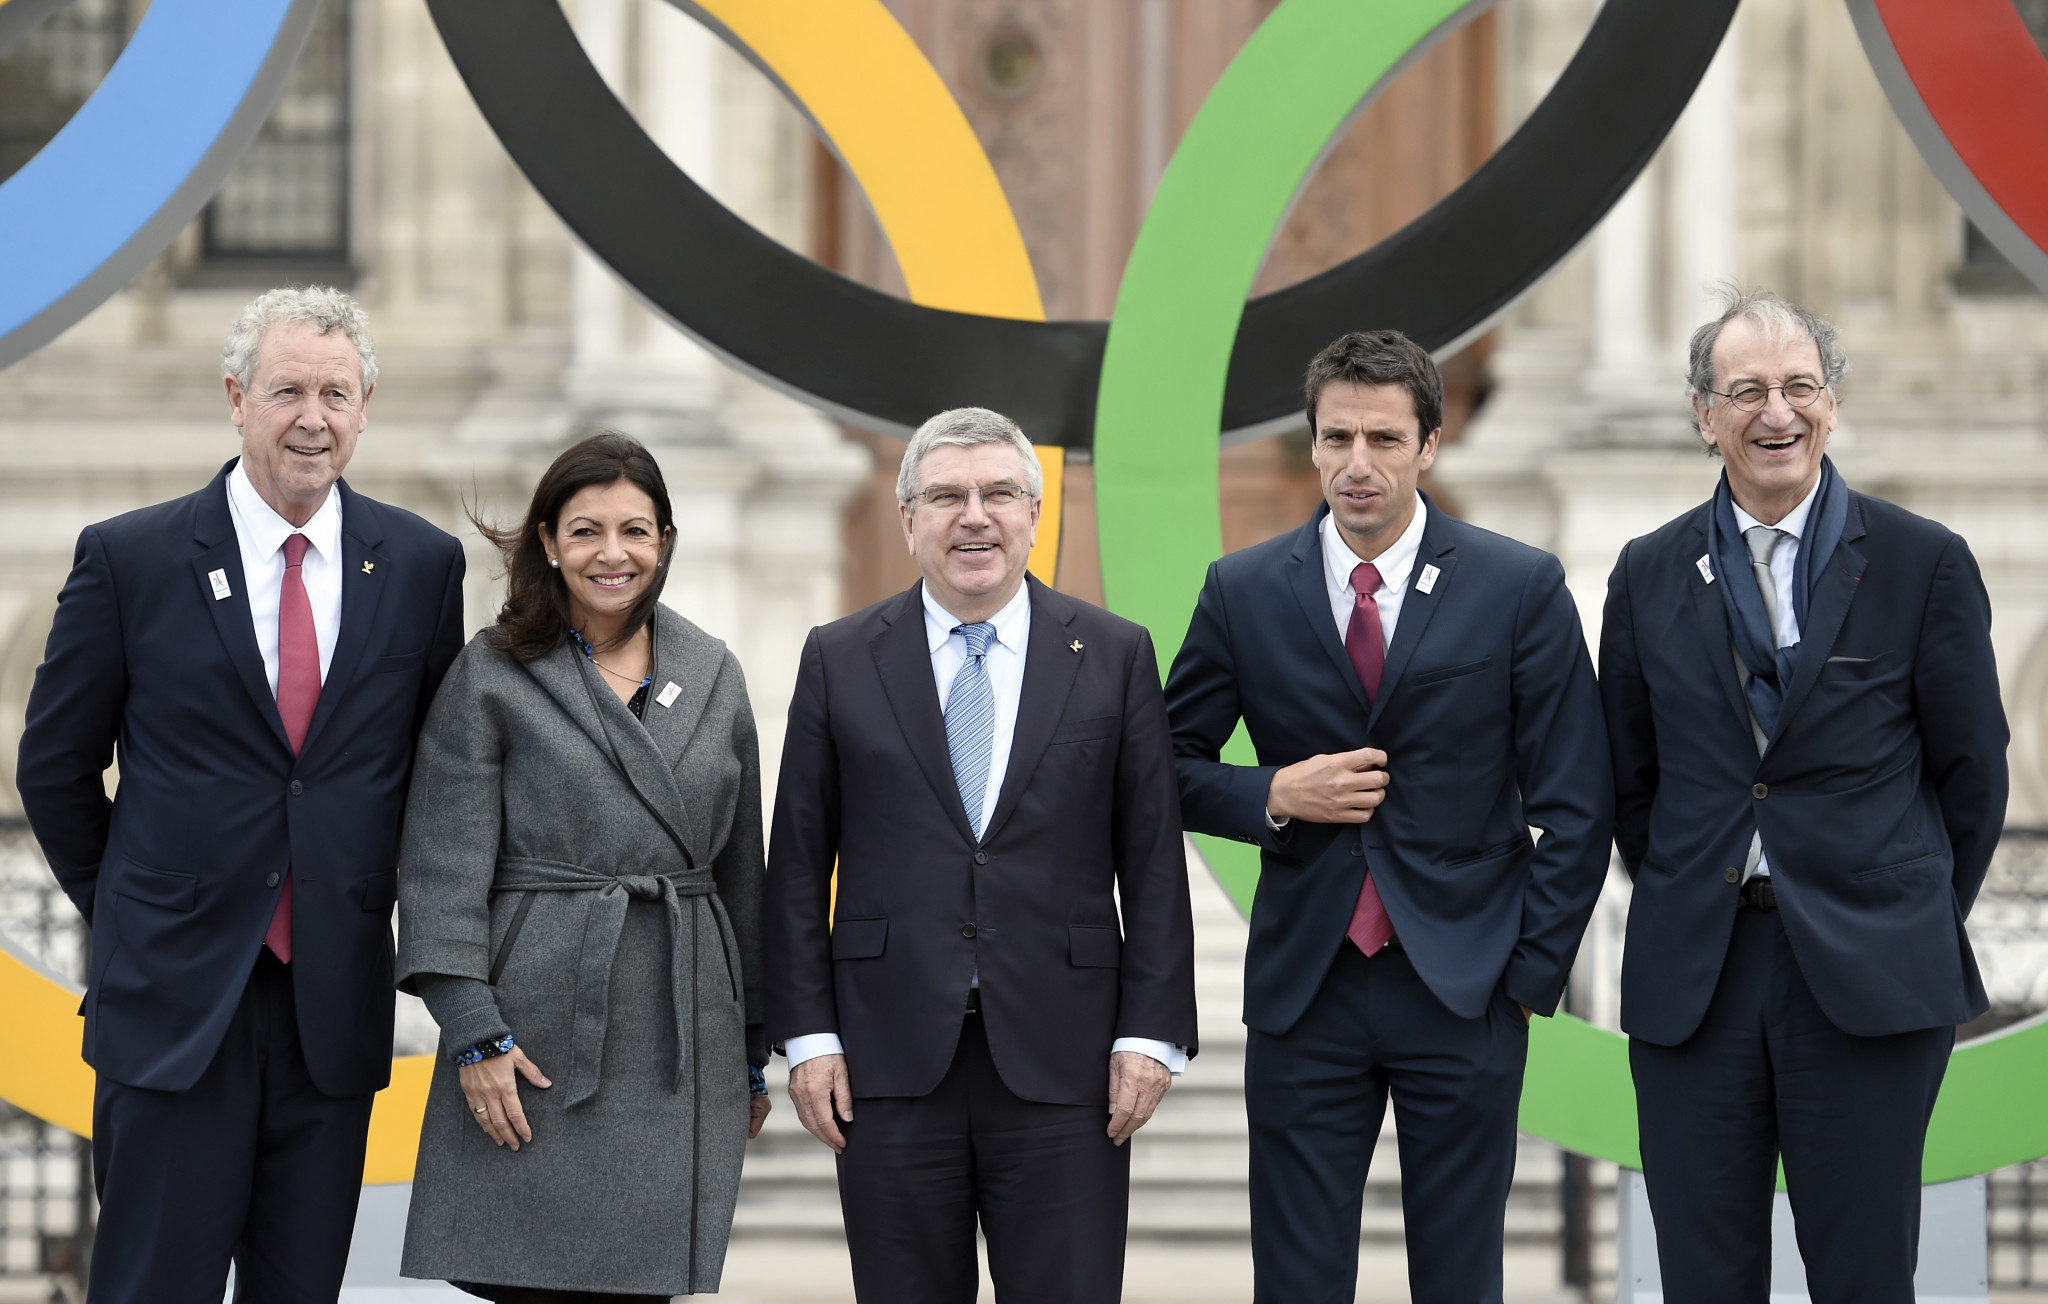 Thomas Bach's trip to meet Mayor Anne Hidalgo will be his latest visit to the French capital, including one in October 2017 shortly after Paris was awarded the 2024 Olympic and Paralympic Games ©Getty Images